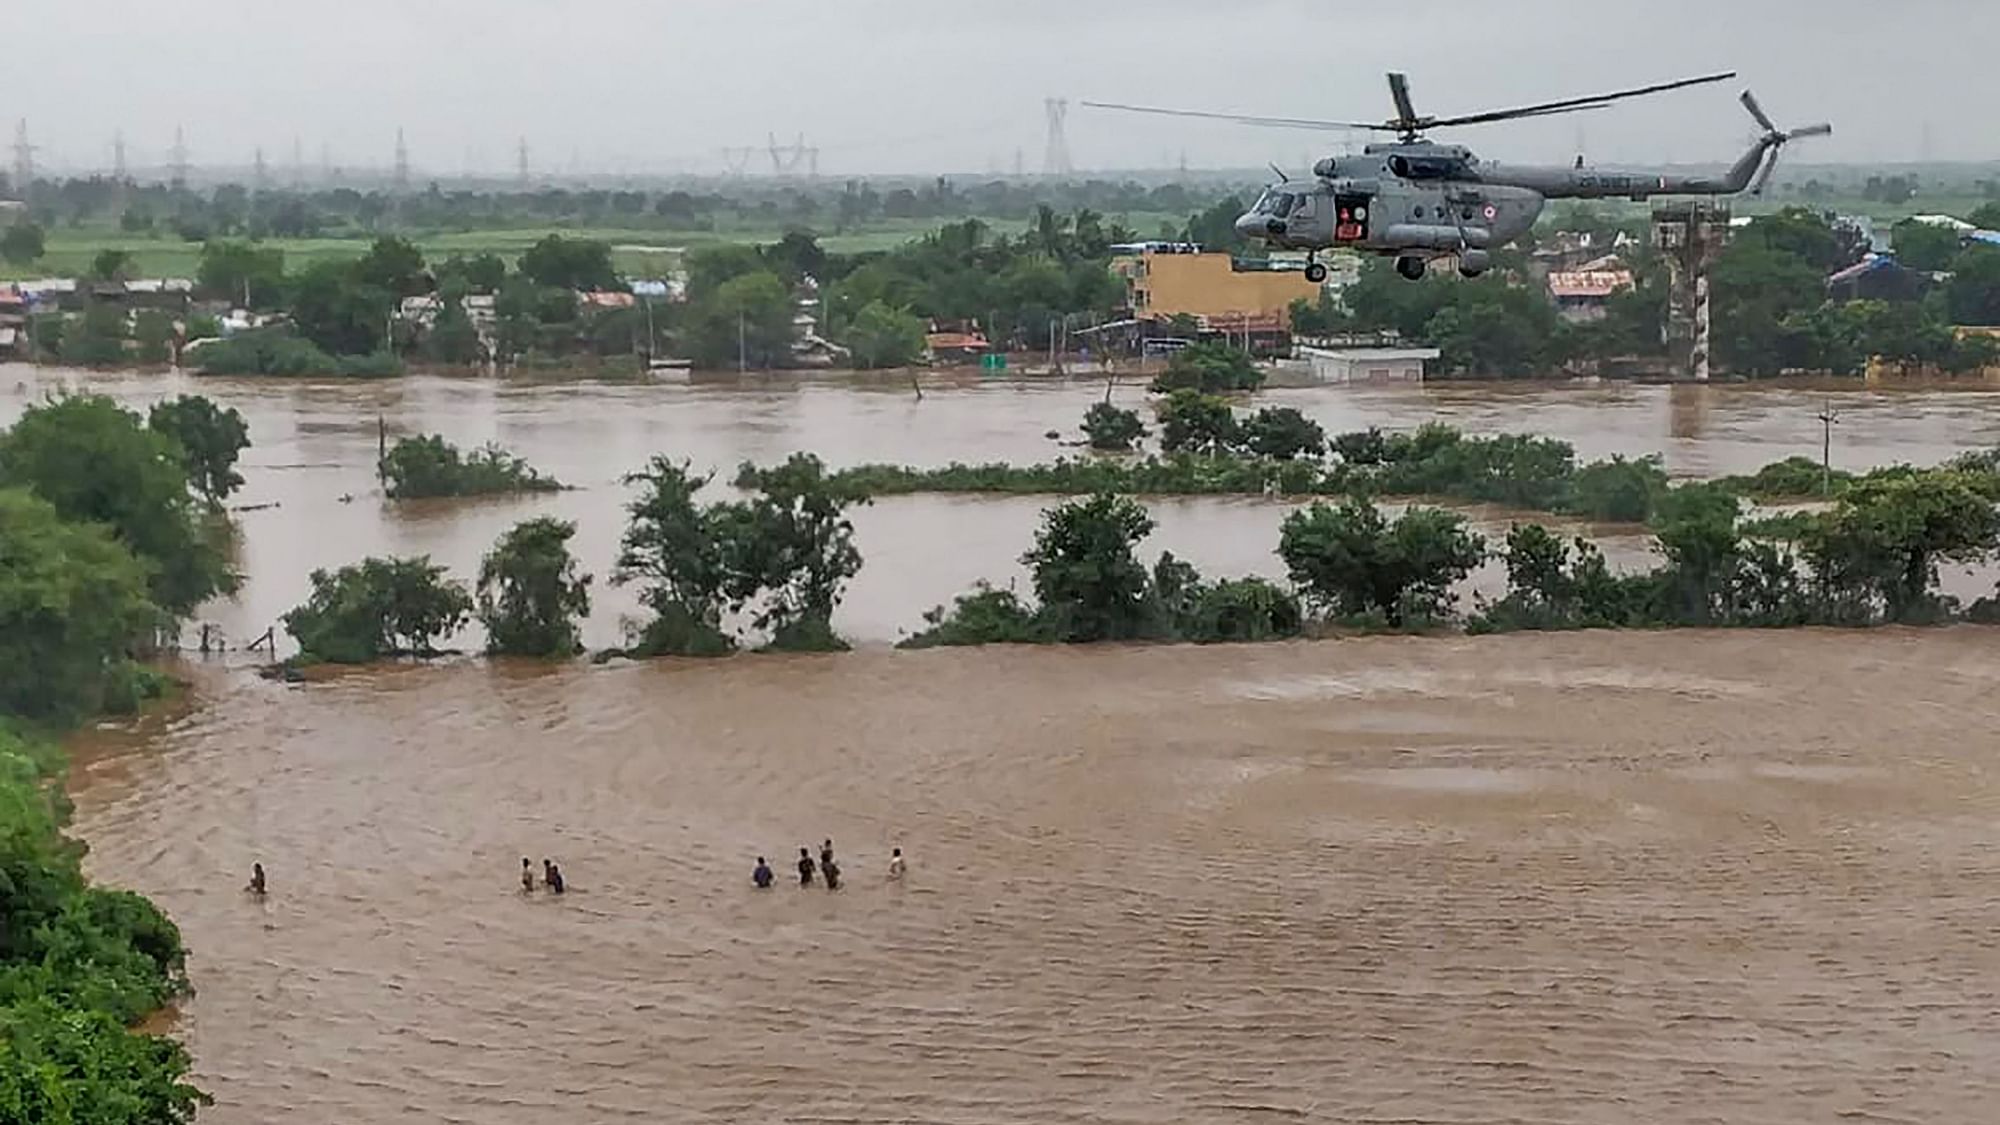 IAF Helicopter flies low to rescue people stranded in the floods in Surat.